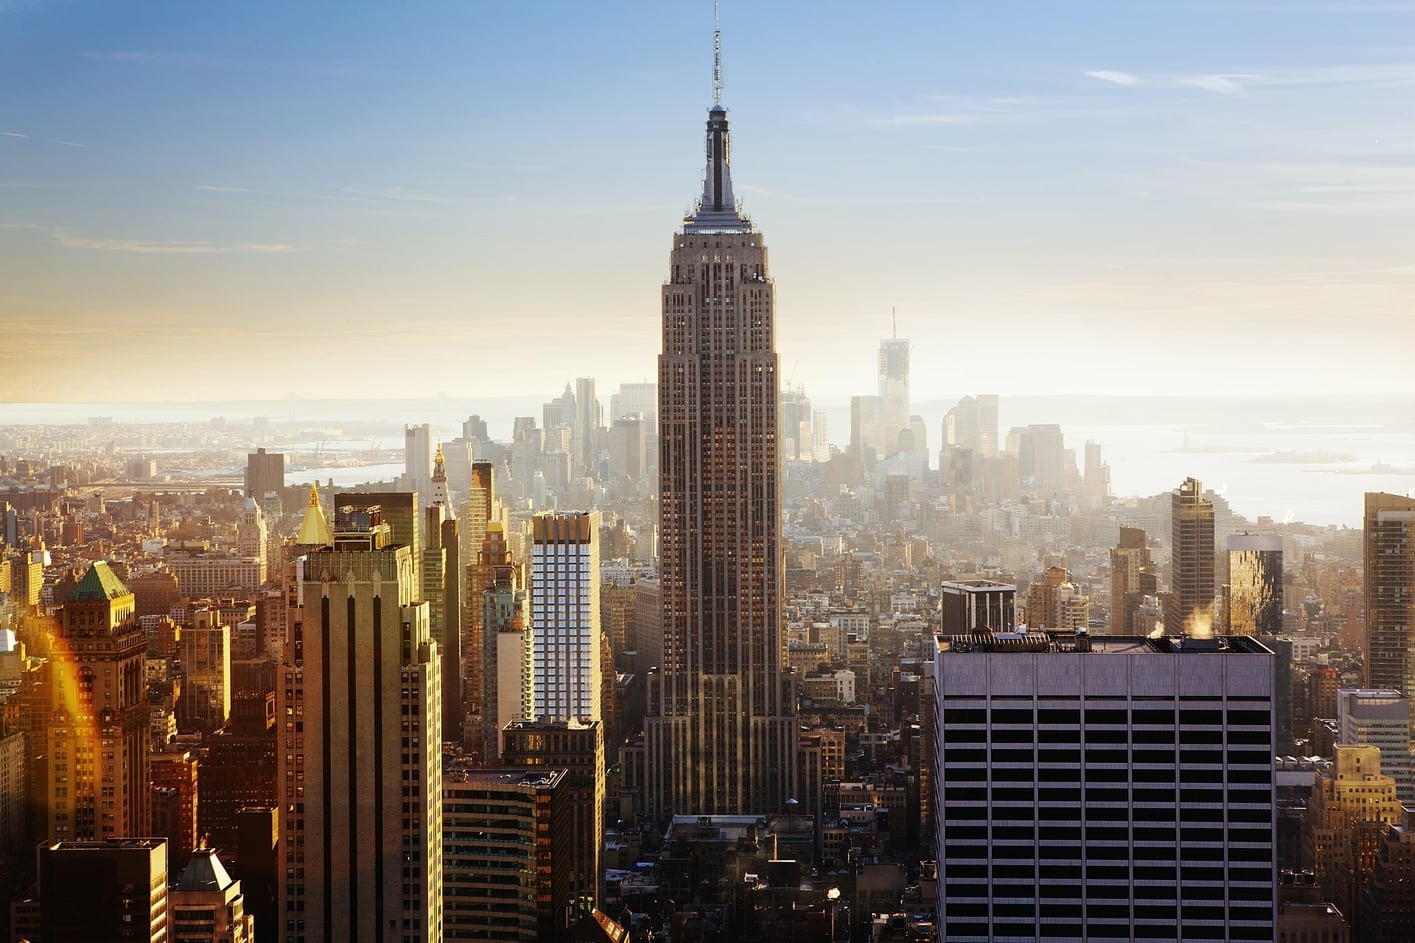 Empire State Building, places of interest in manhattan